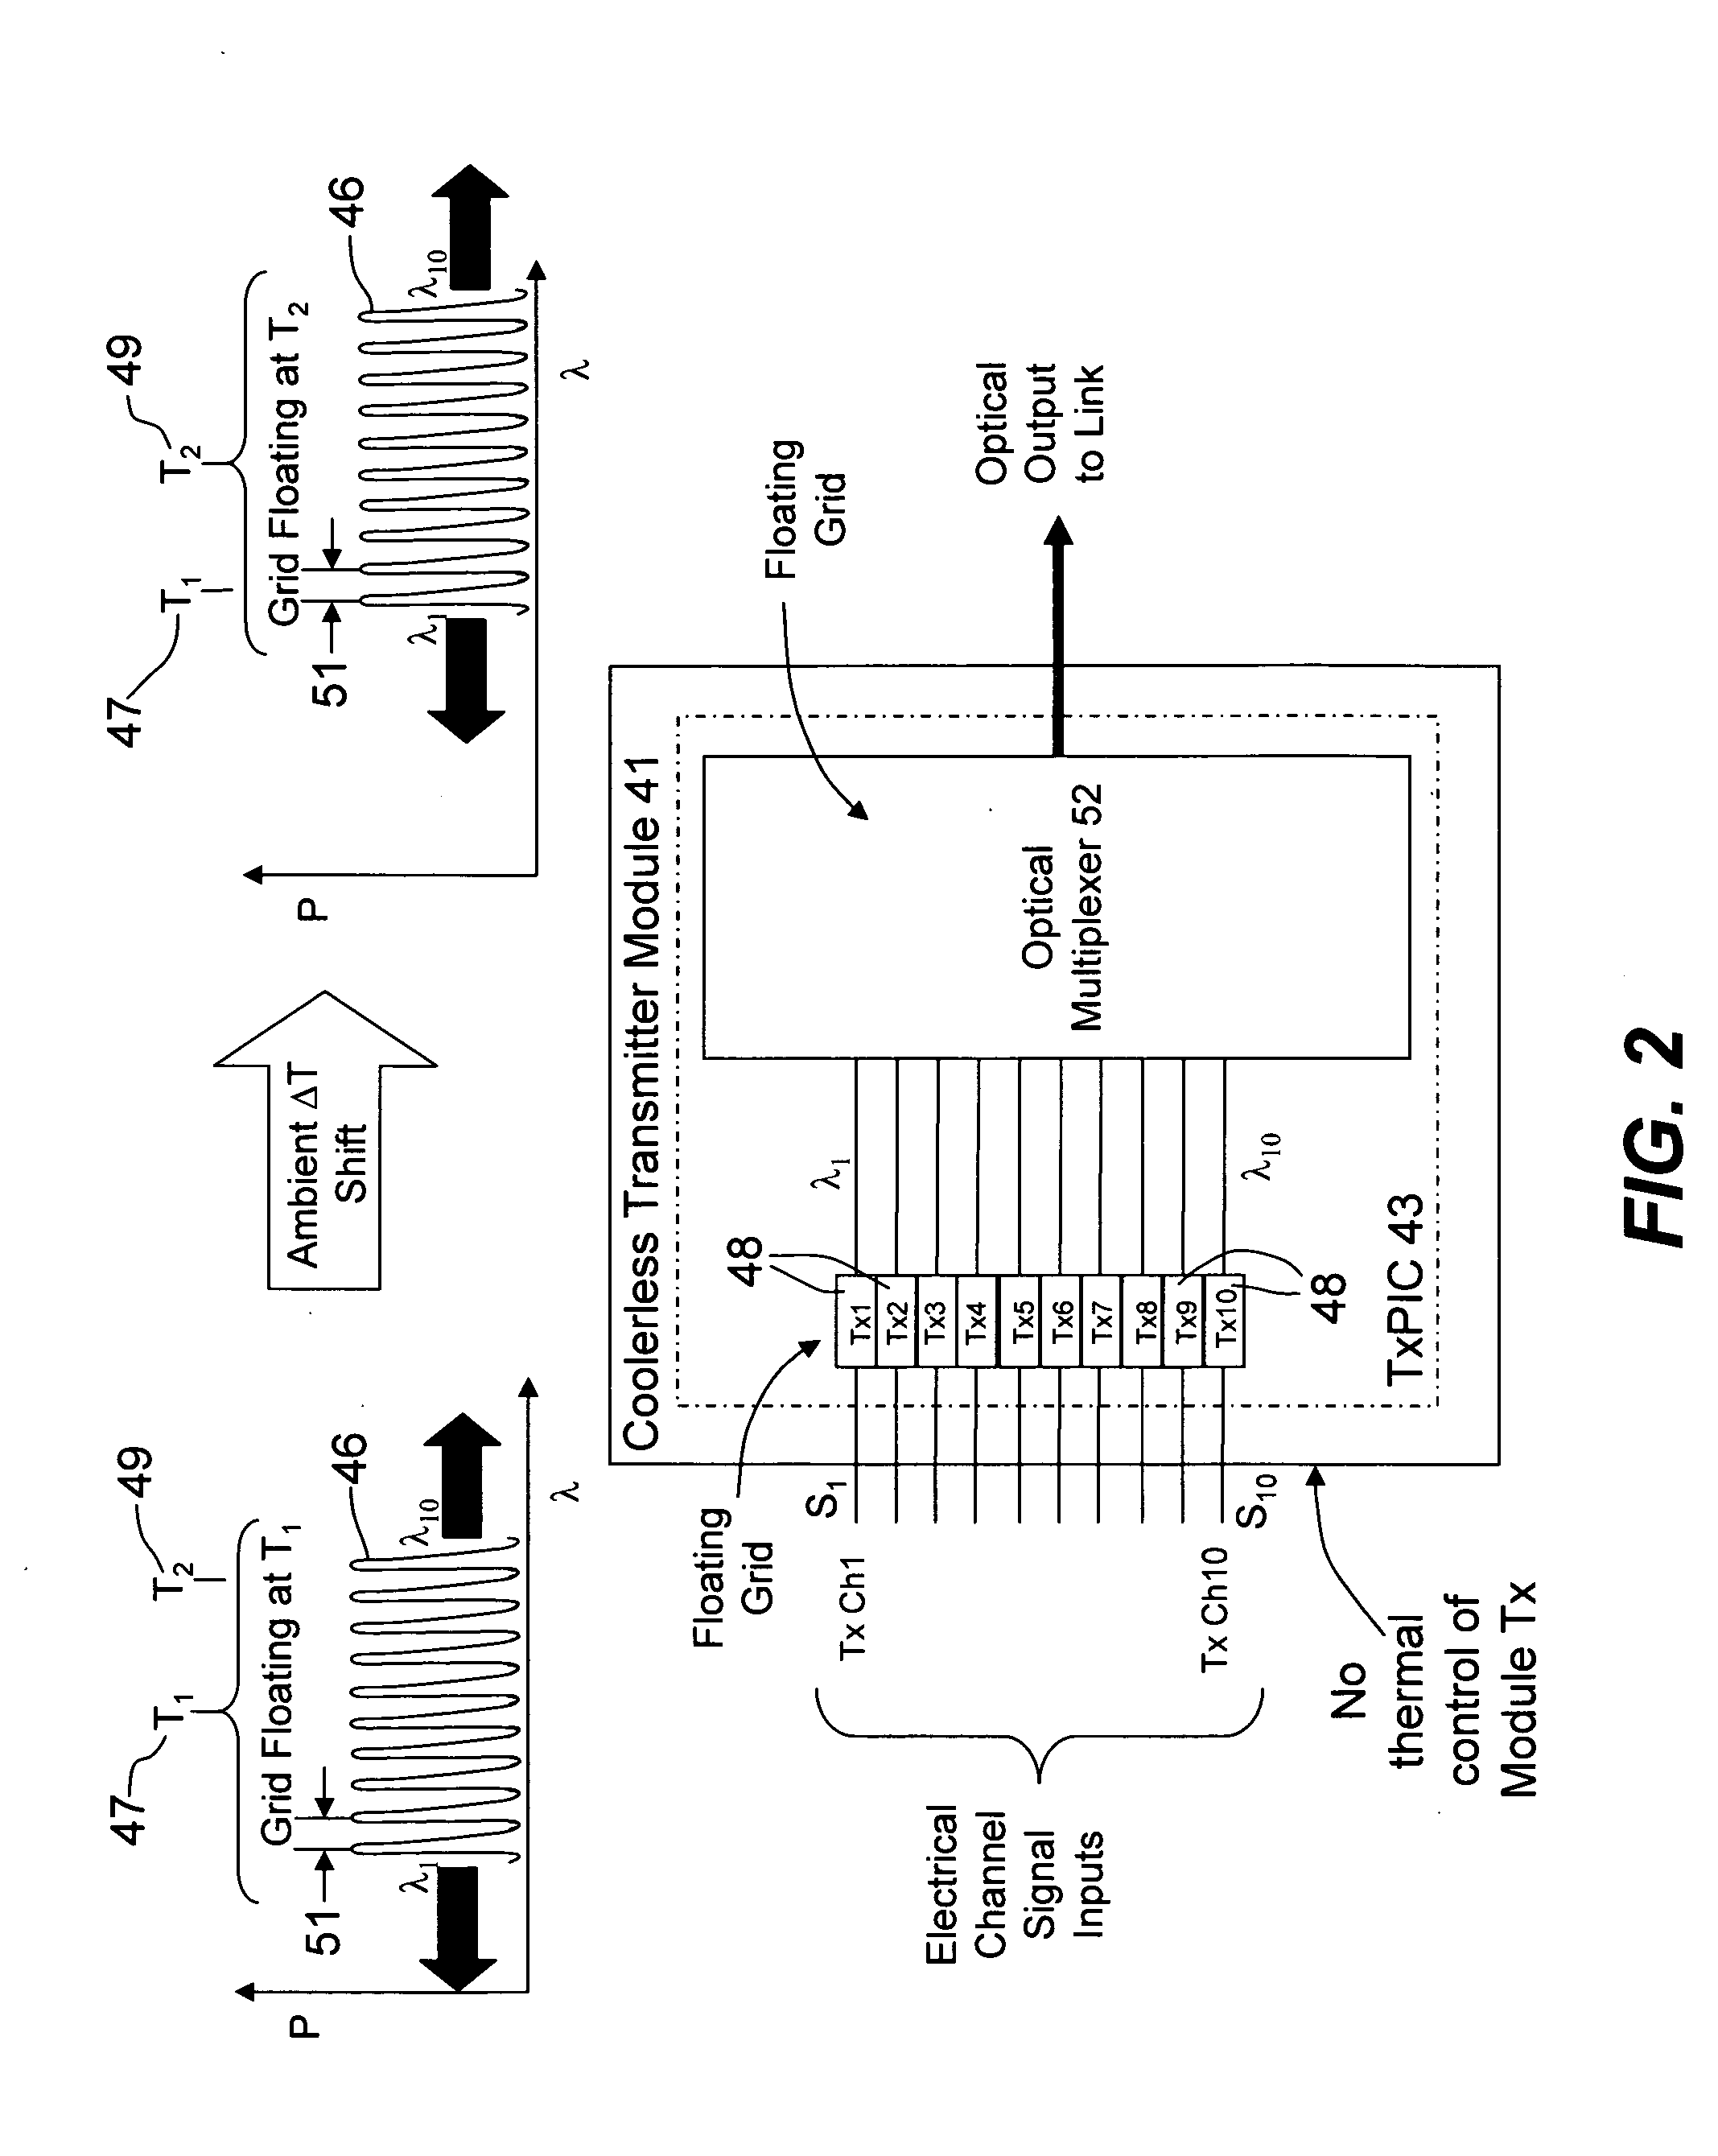 Thermally-floating transmitter wavelength grid of signal channels in a WDM transmission system